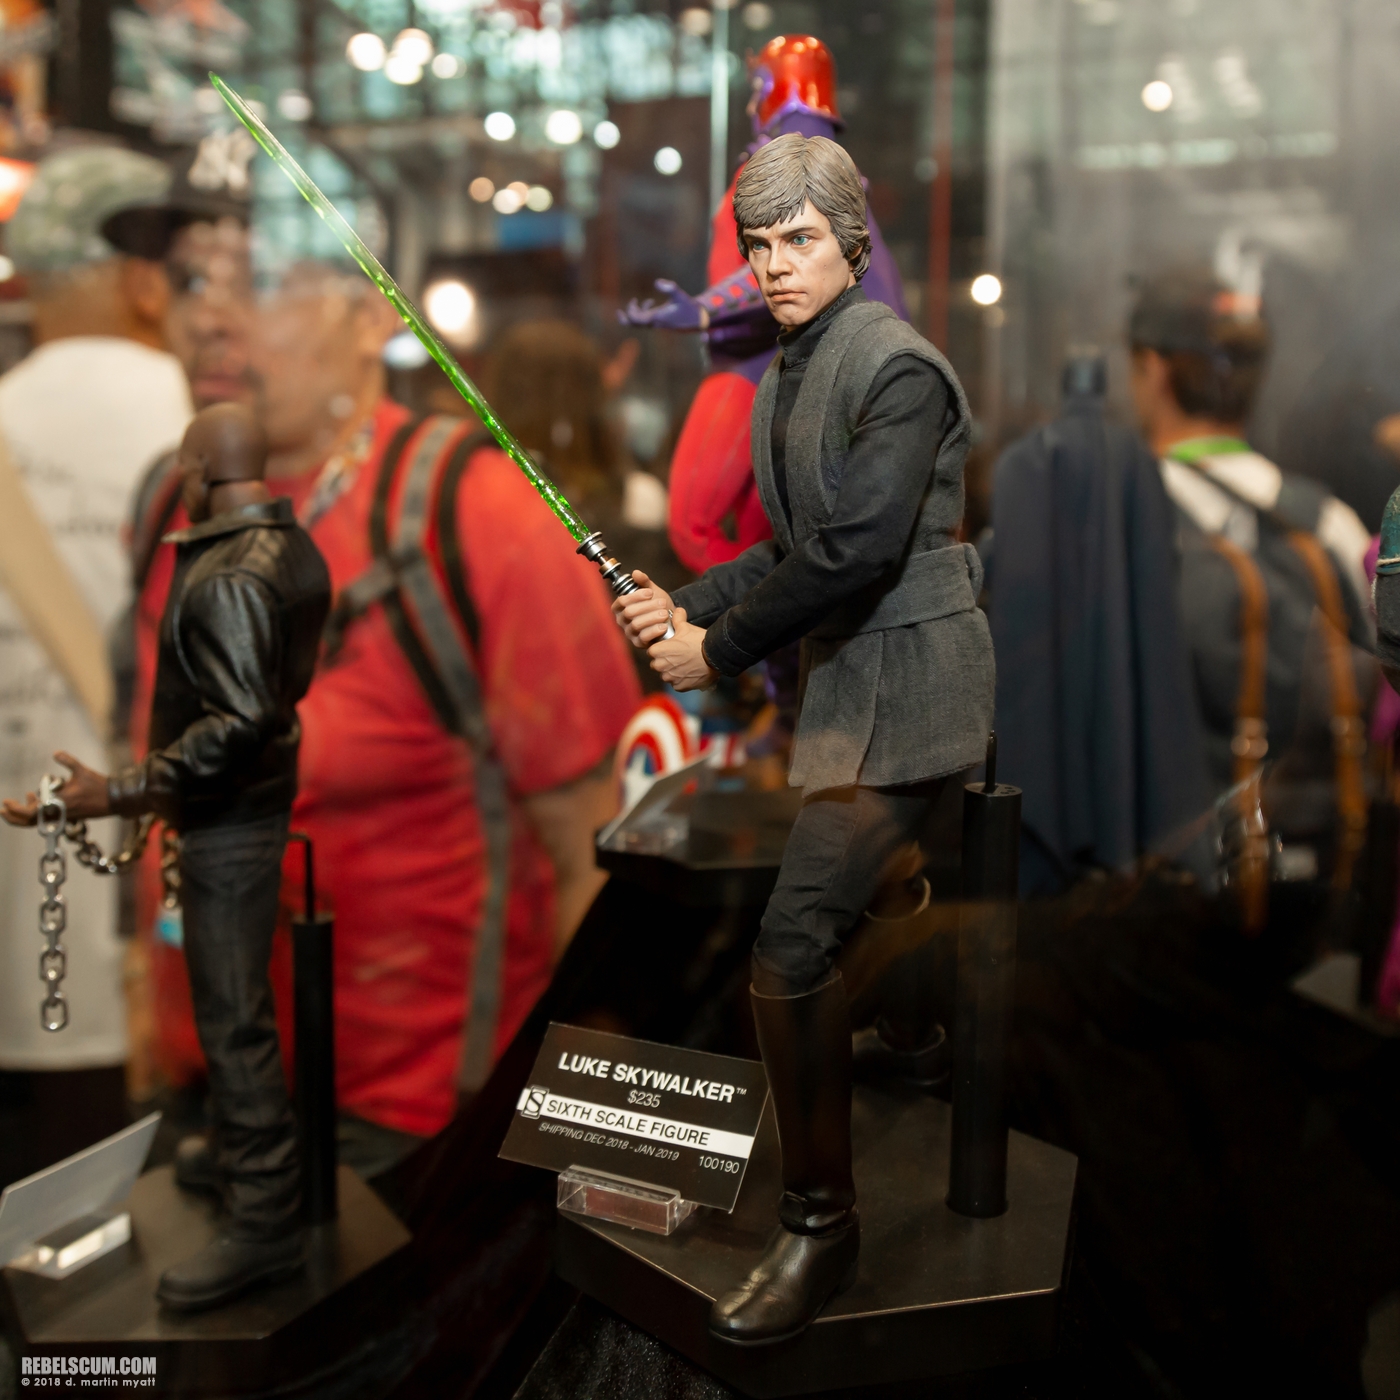 Sideshow-Collectibles-Star-Wars-NYCC-2018-005.jpg